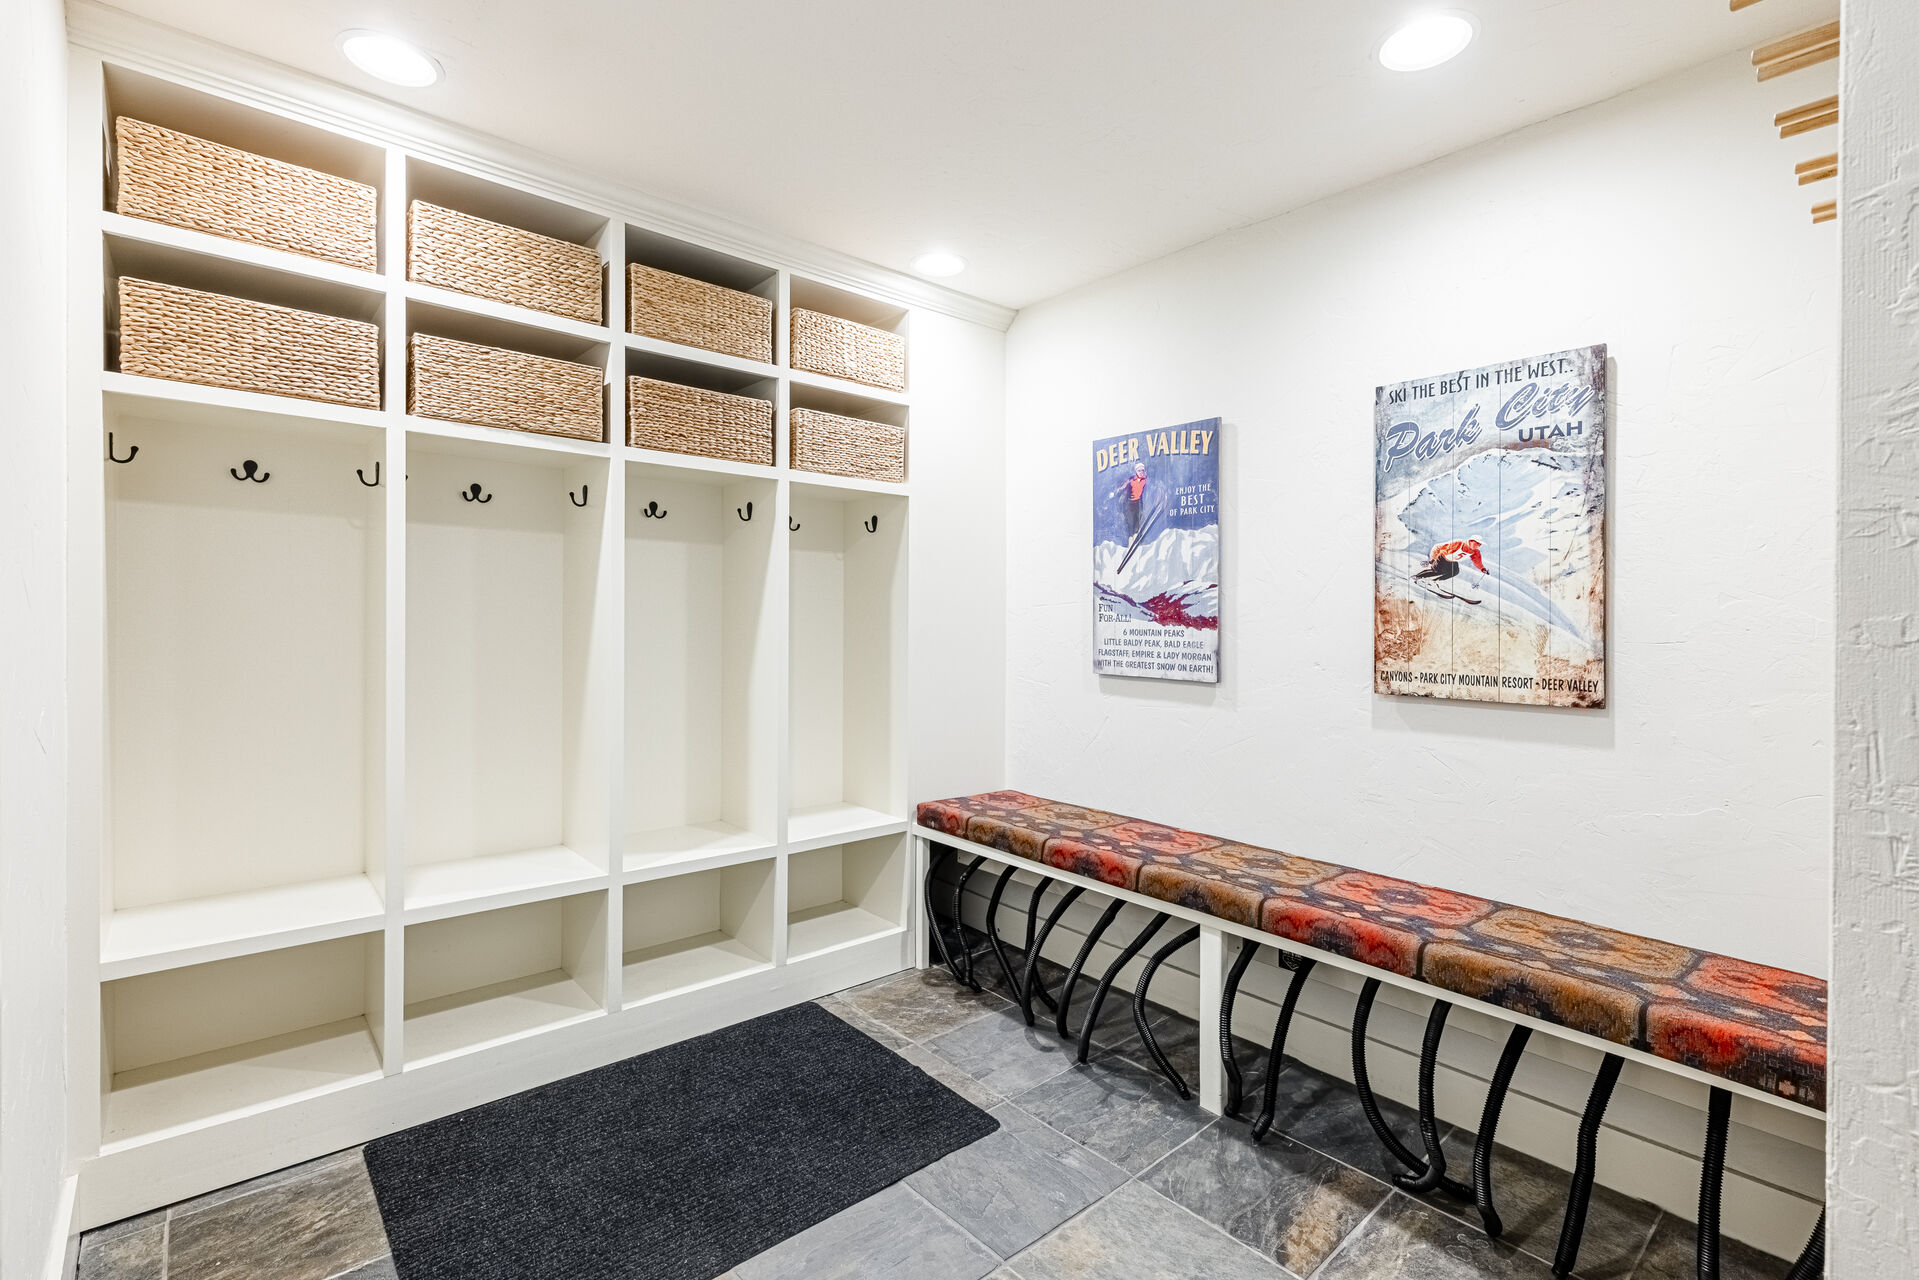 Entry level mud room to store all your gear with boot warmers